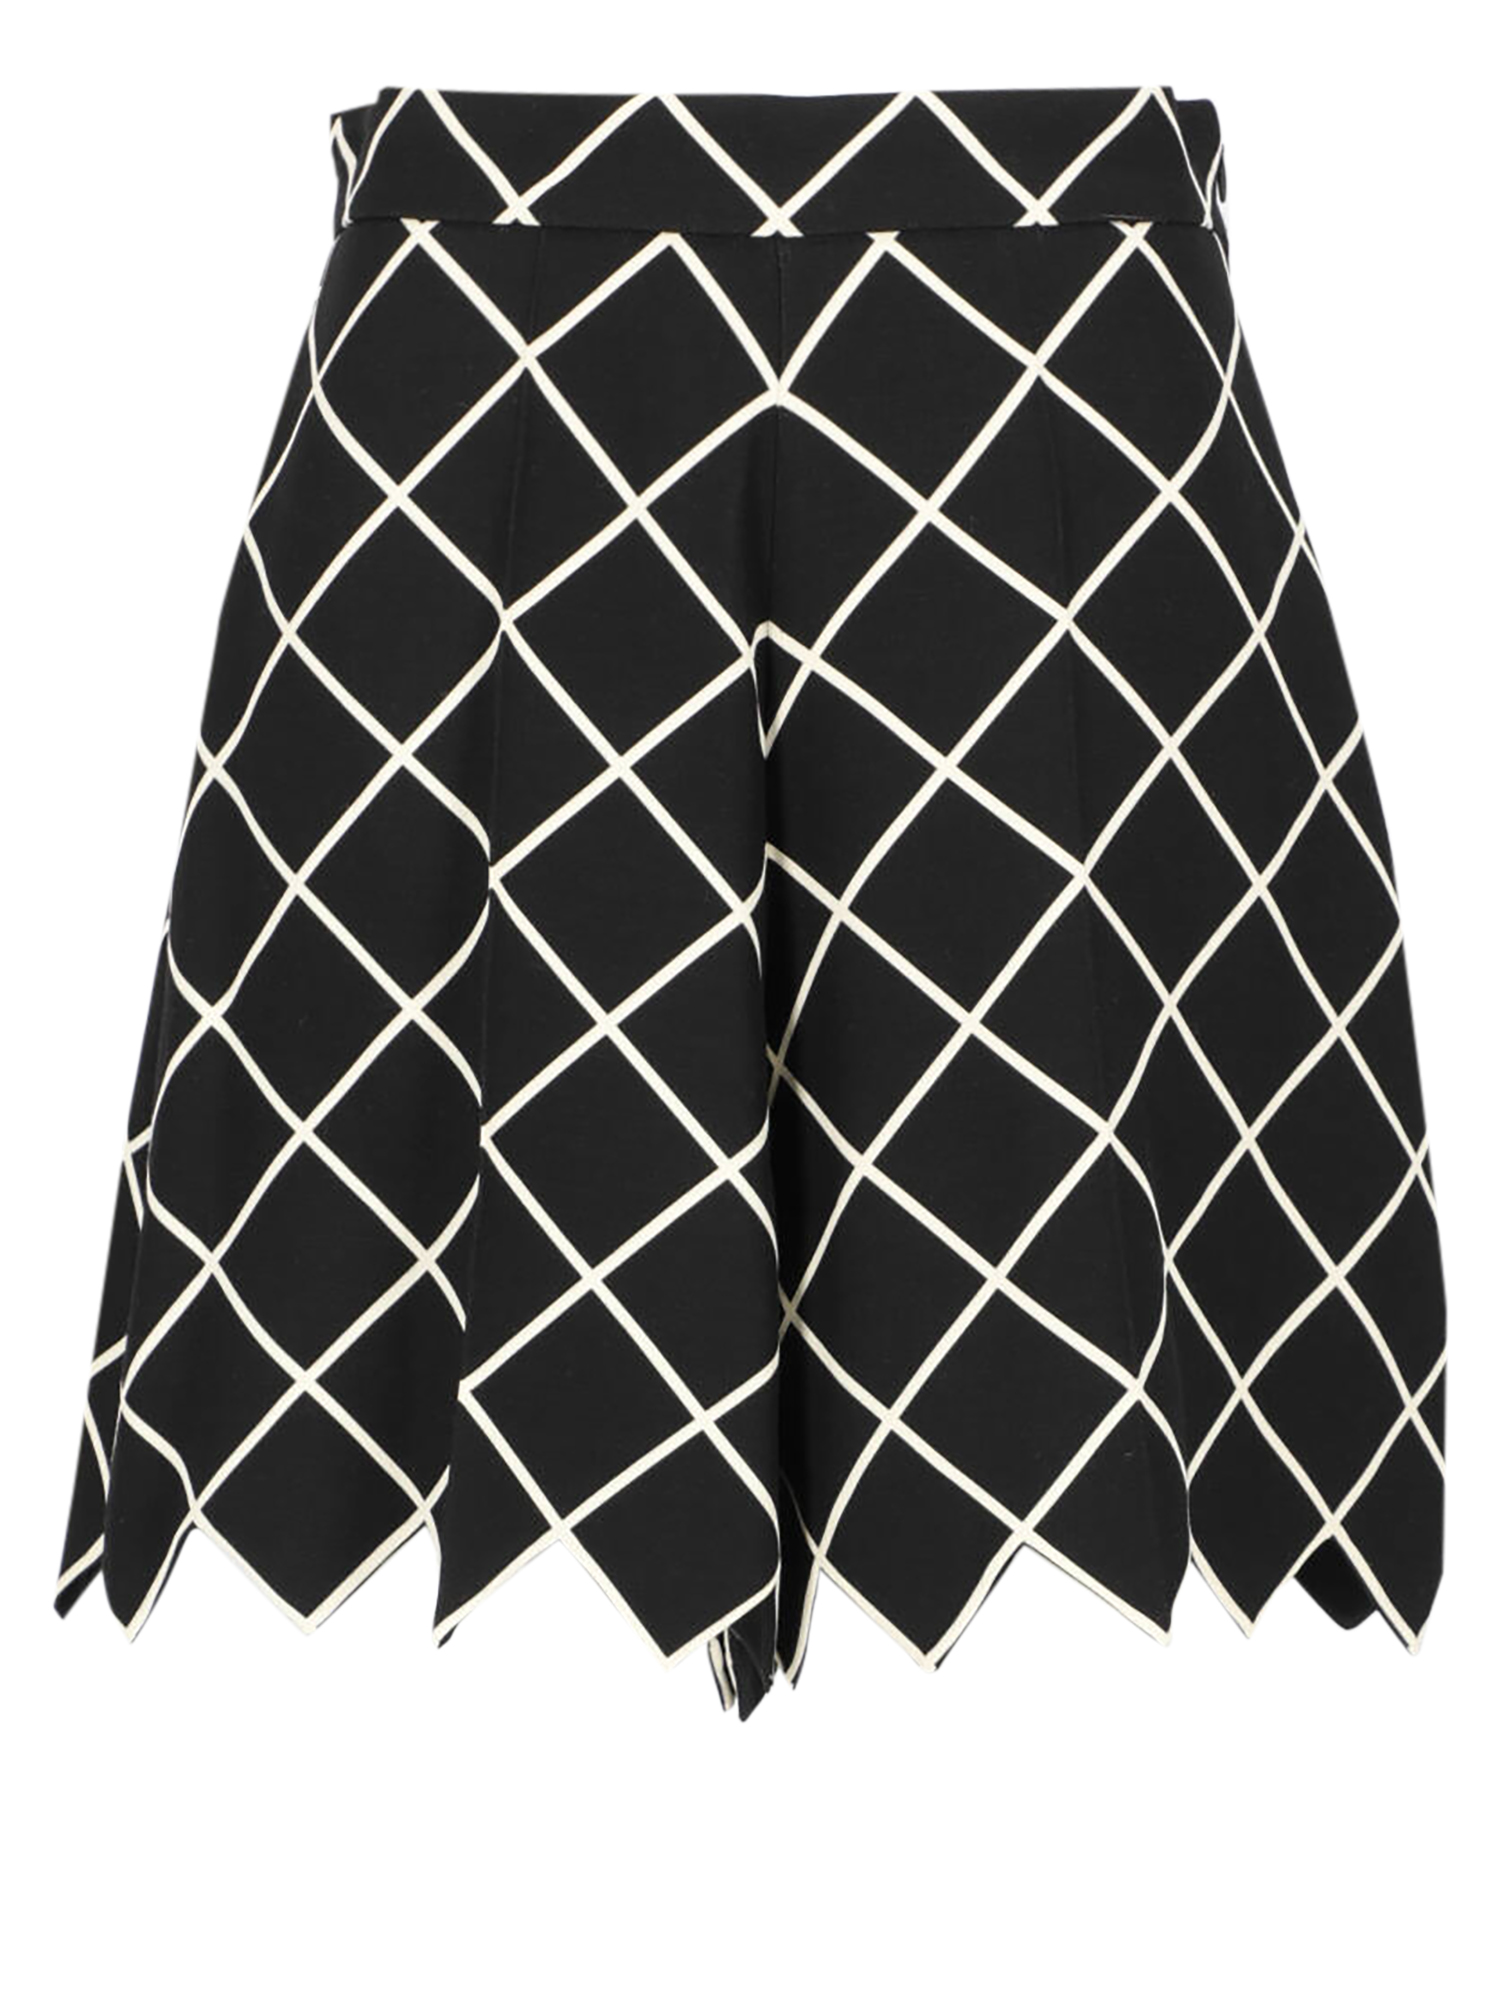 Condition: Excellent, Geometric Pattern Fabric, Color: Black, White - S - US 4 -